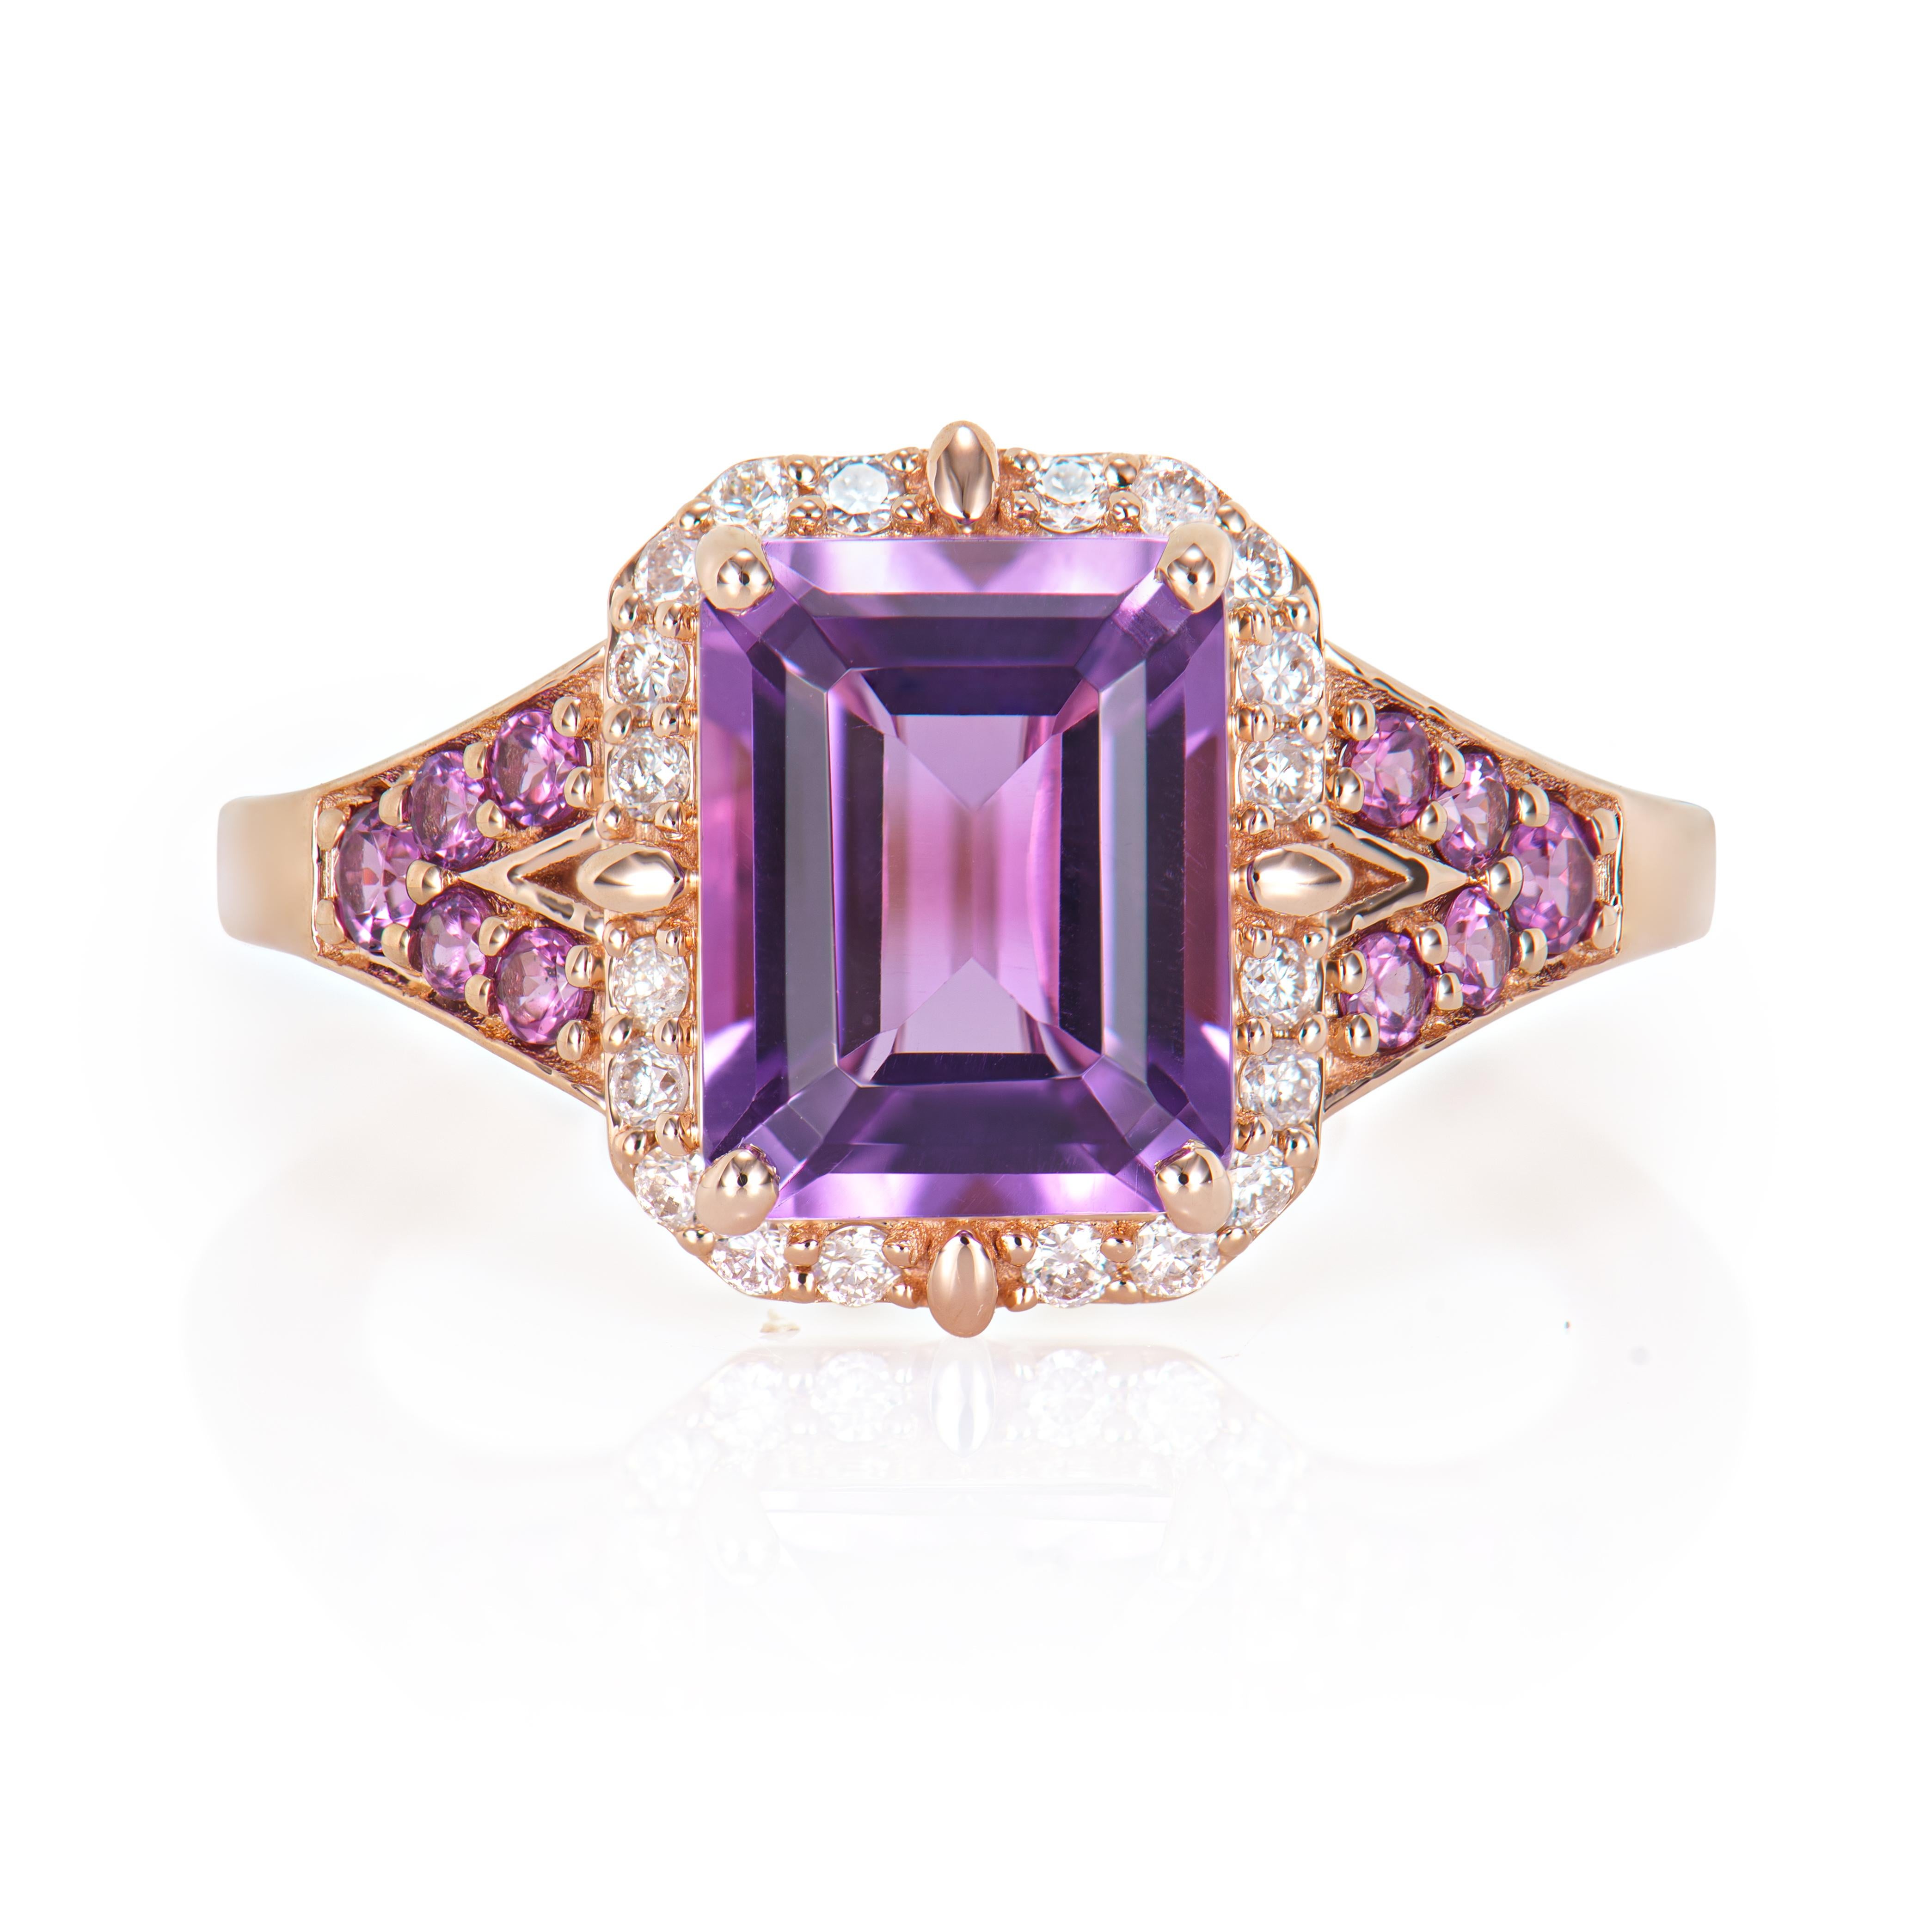 Contemporary 2.21 Carat Amethyst Fancy Ring in 14KRG with Rhodolite and White Diamond.   For Sale